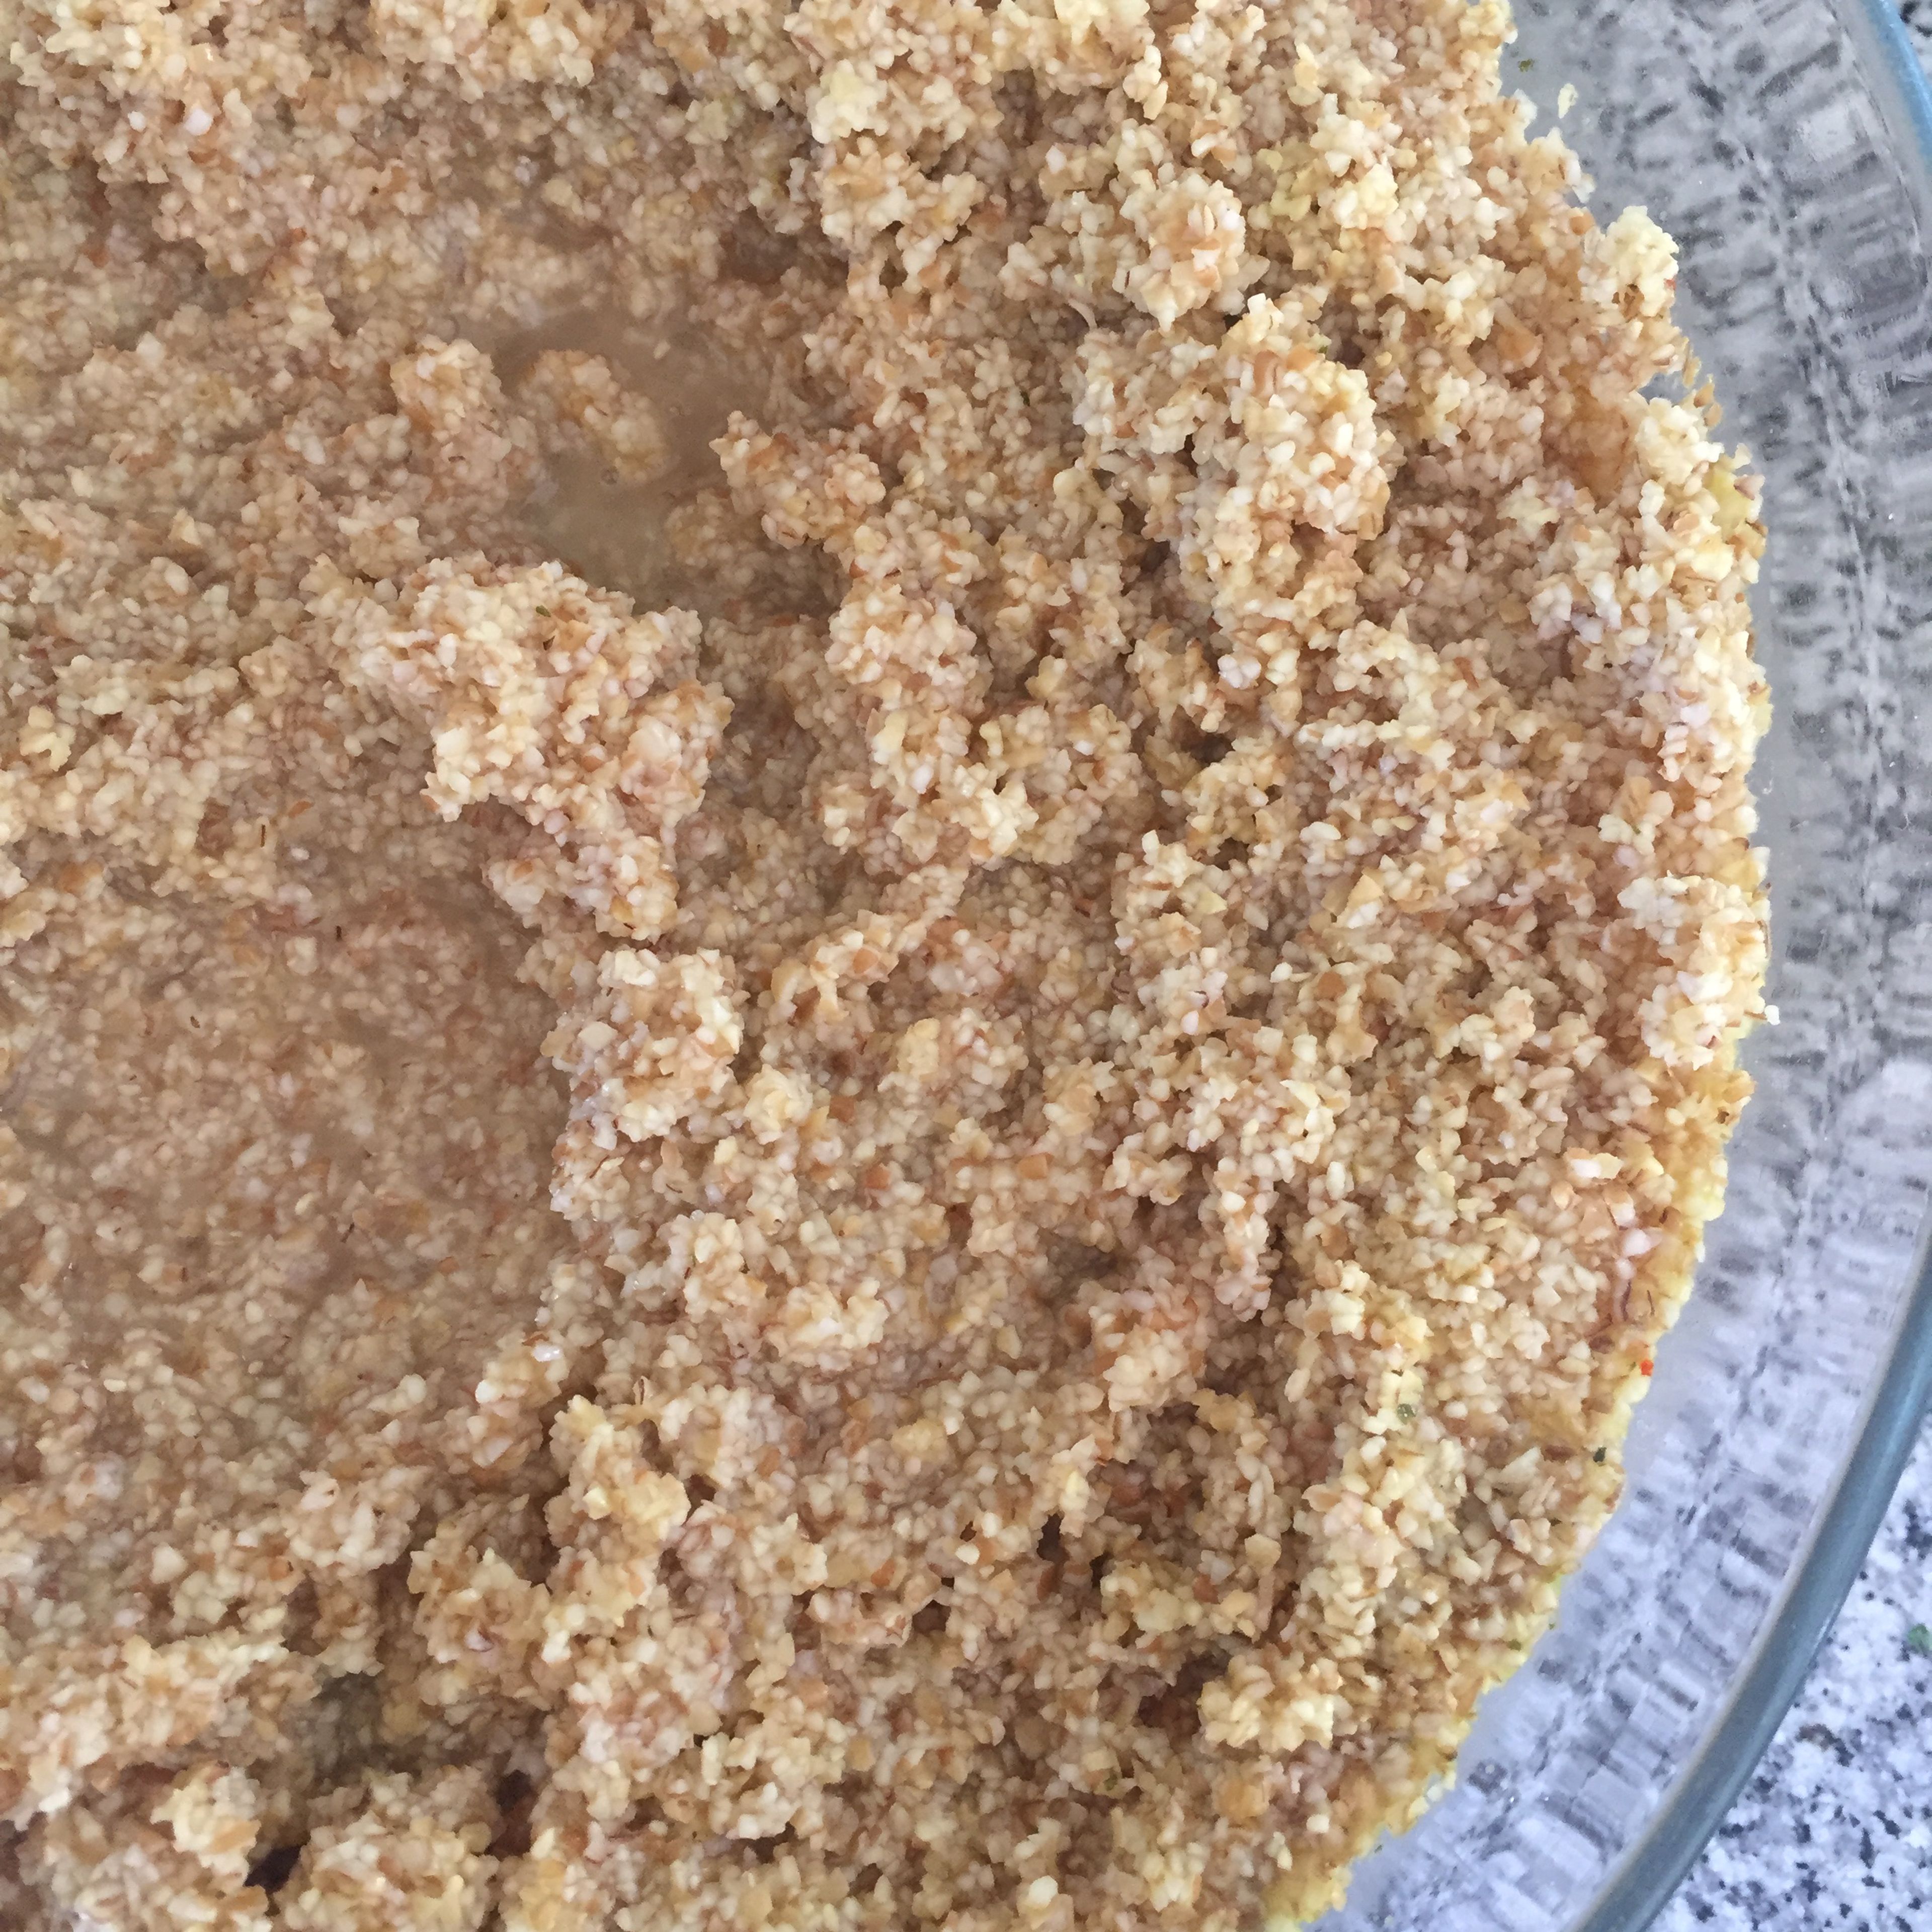 after about half an hour, the bulgur shoud look something like this. drain any excess liquid, and place in a bowl.